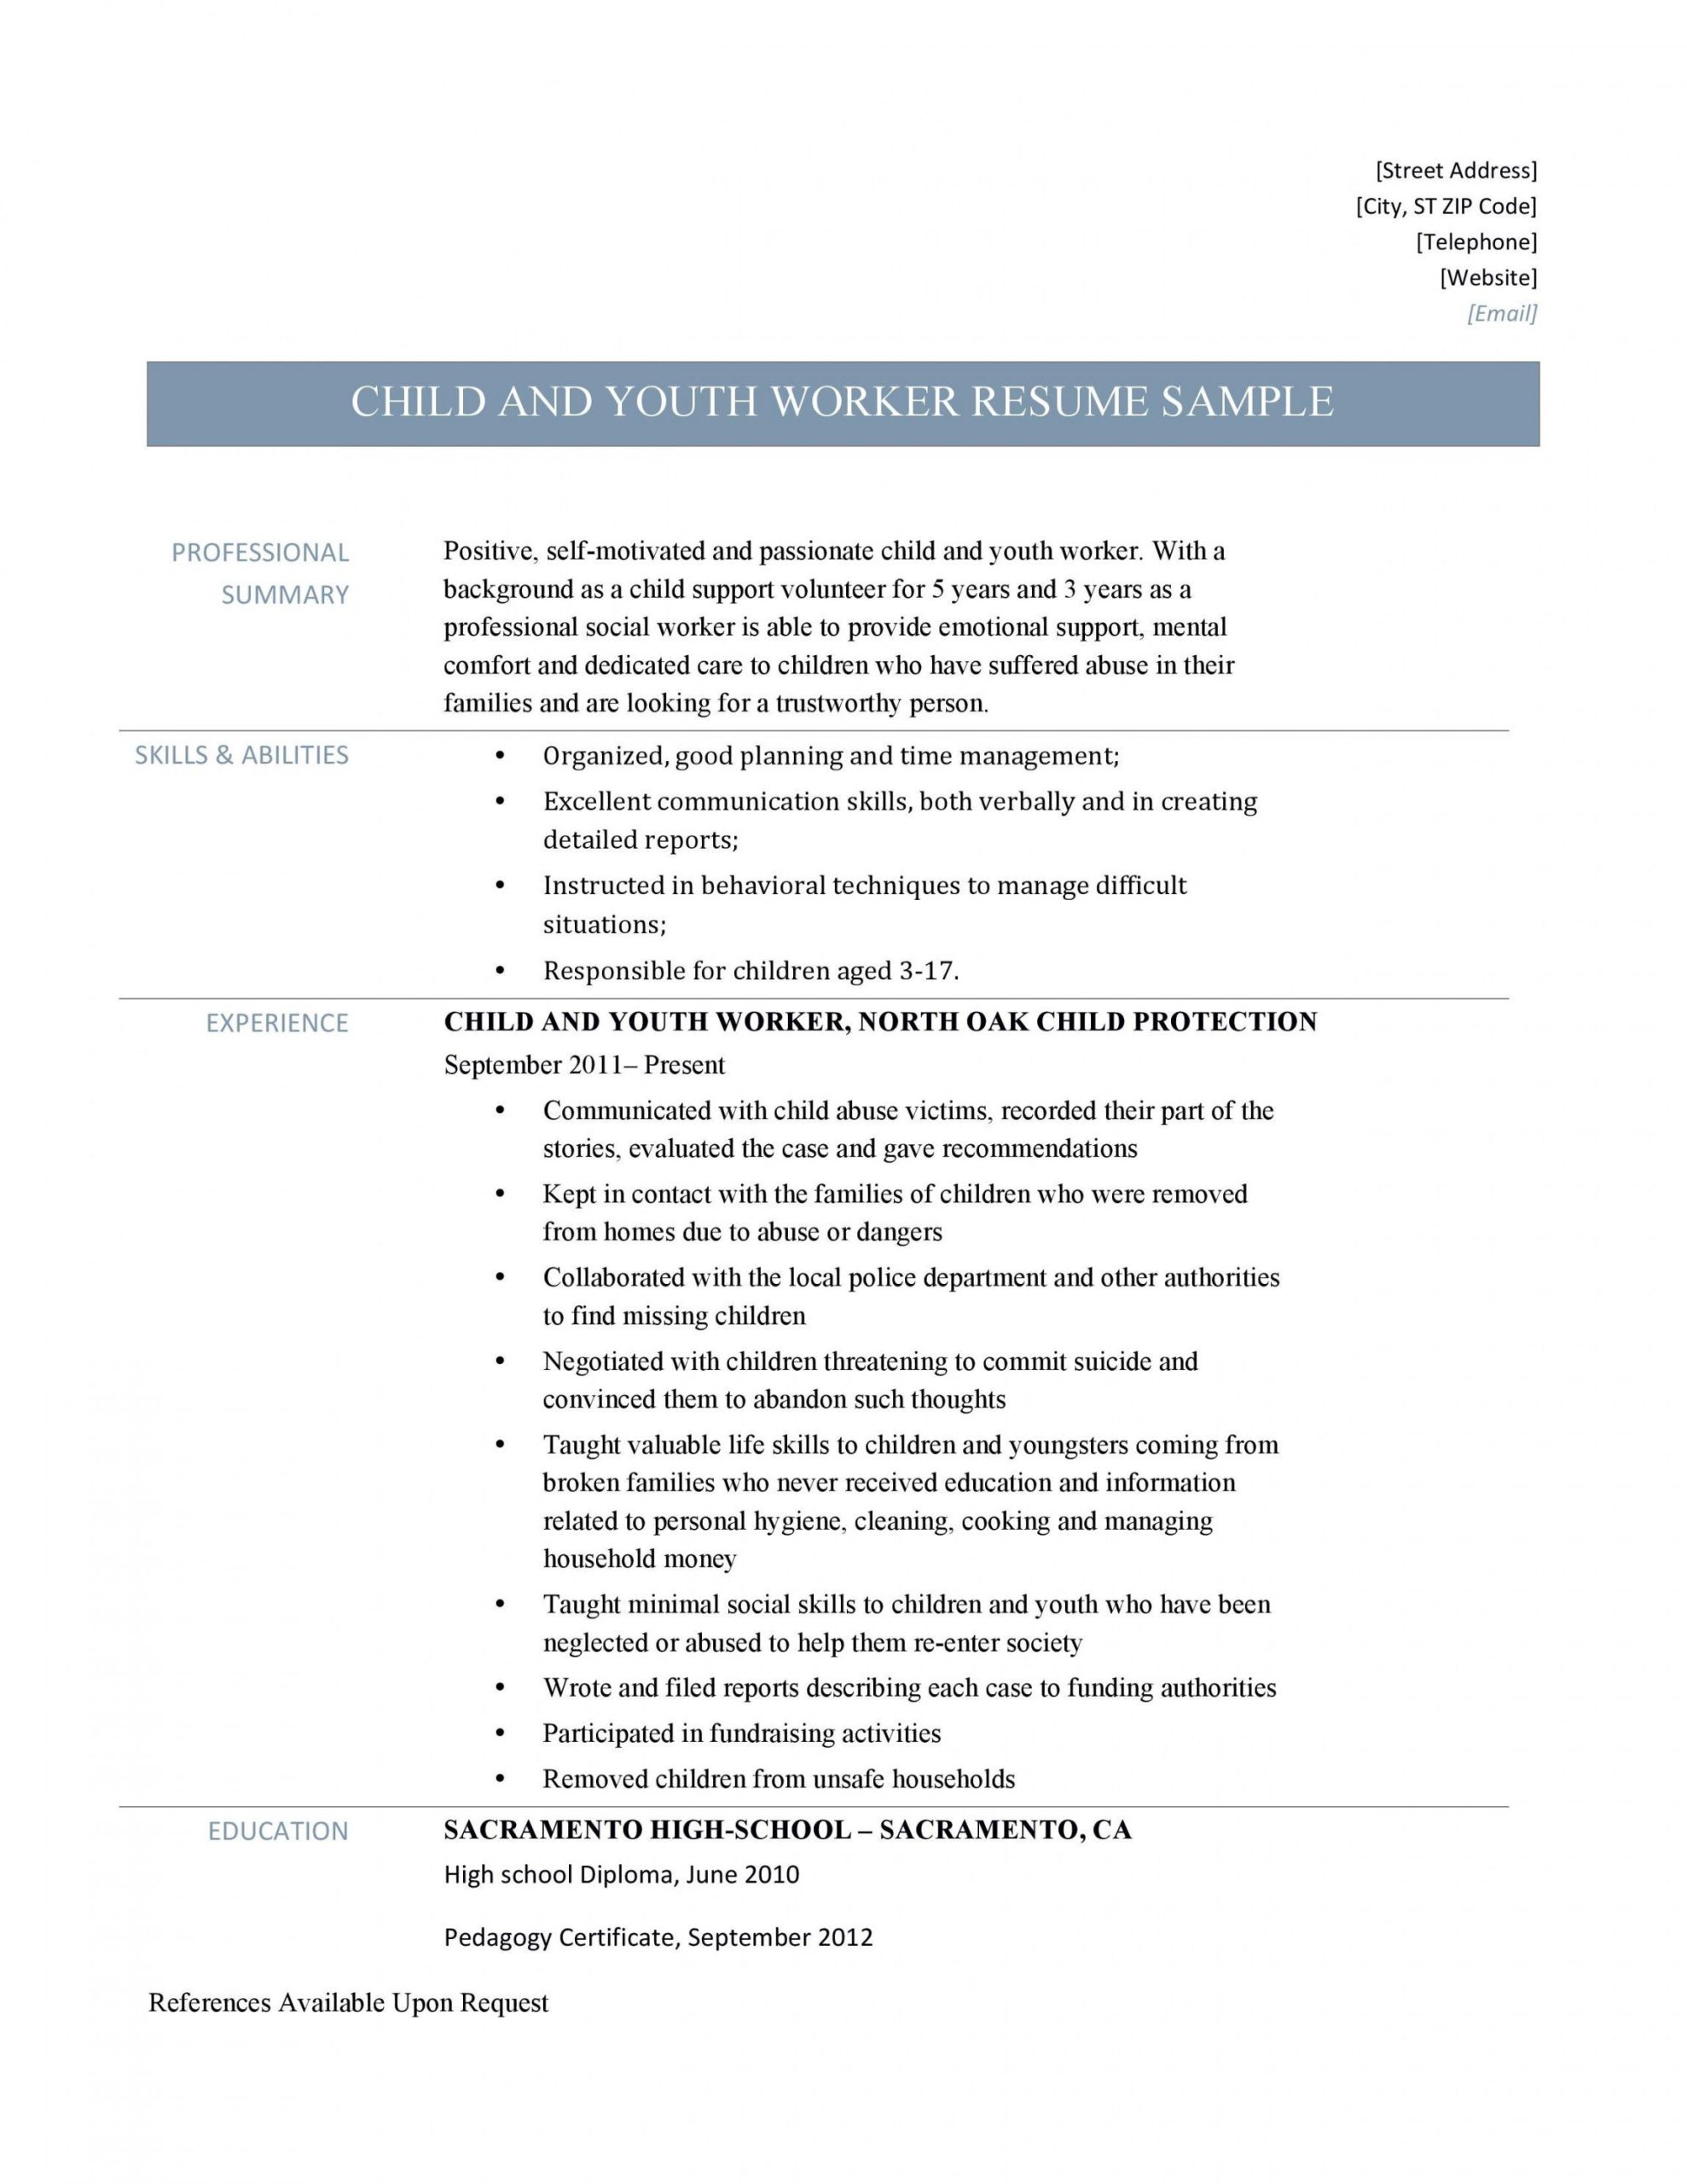 Child and Youth Care Worker Resume Sample Youth Worker Job Description Template Pdf Job Description …